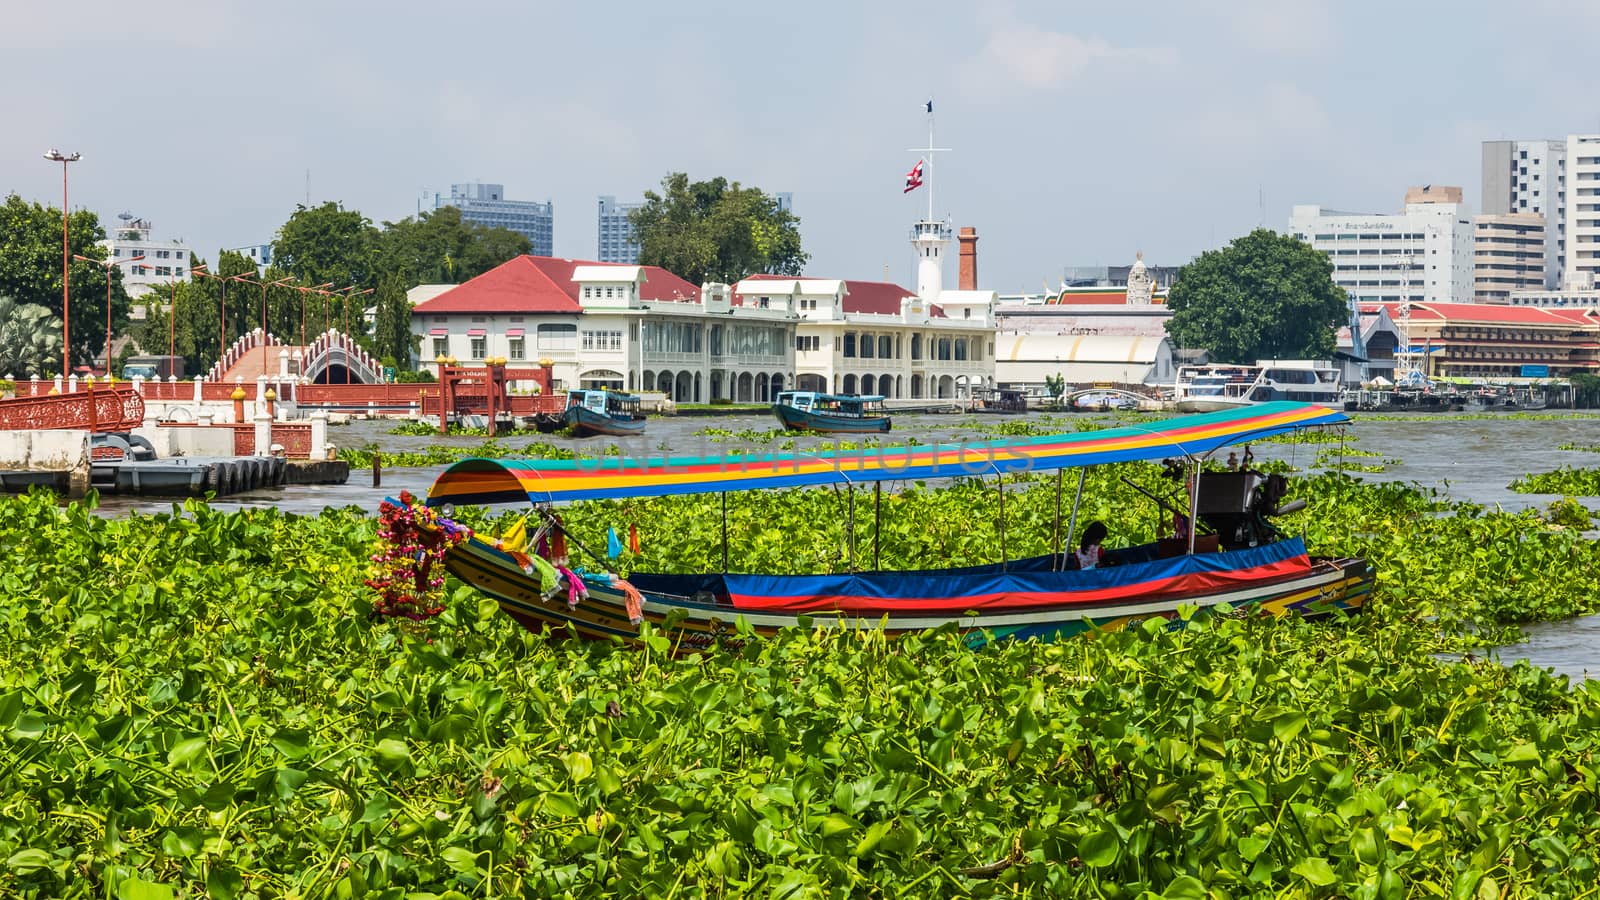 Tourist boat on the Chao Phraya River on the background of a harbor. City of Bangkok occupies 1.568 square kilometers with a population of 8 million inhabitants.